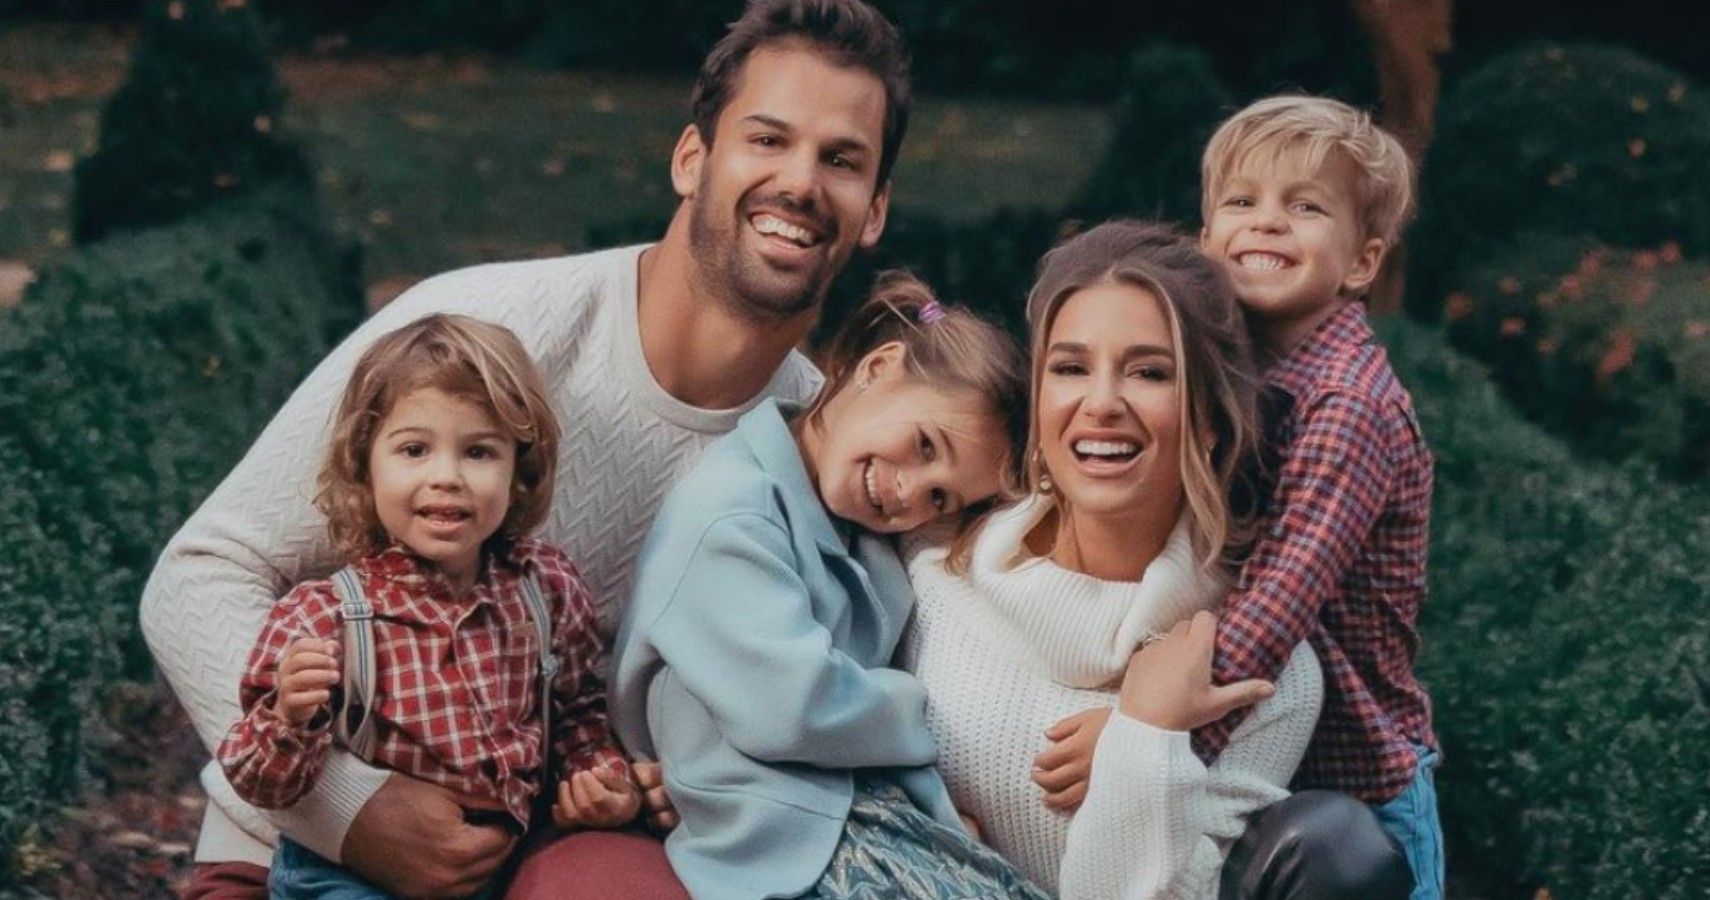 Country Star Jessie James Decker Opens Up About Toddler Son's Hospitalization Scare